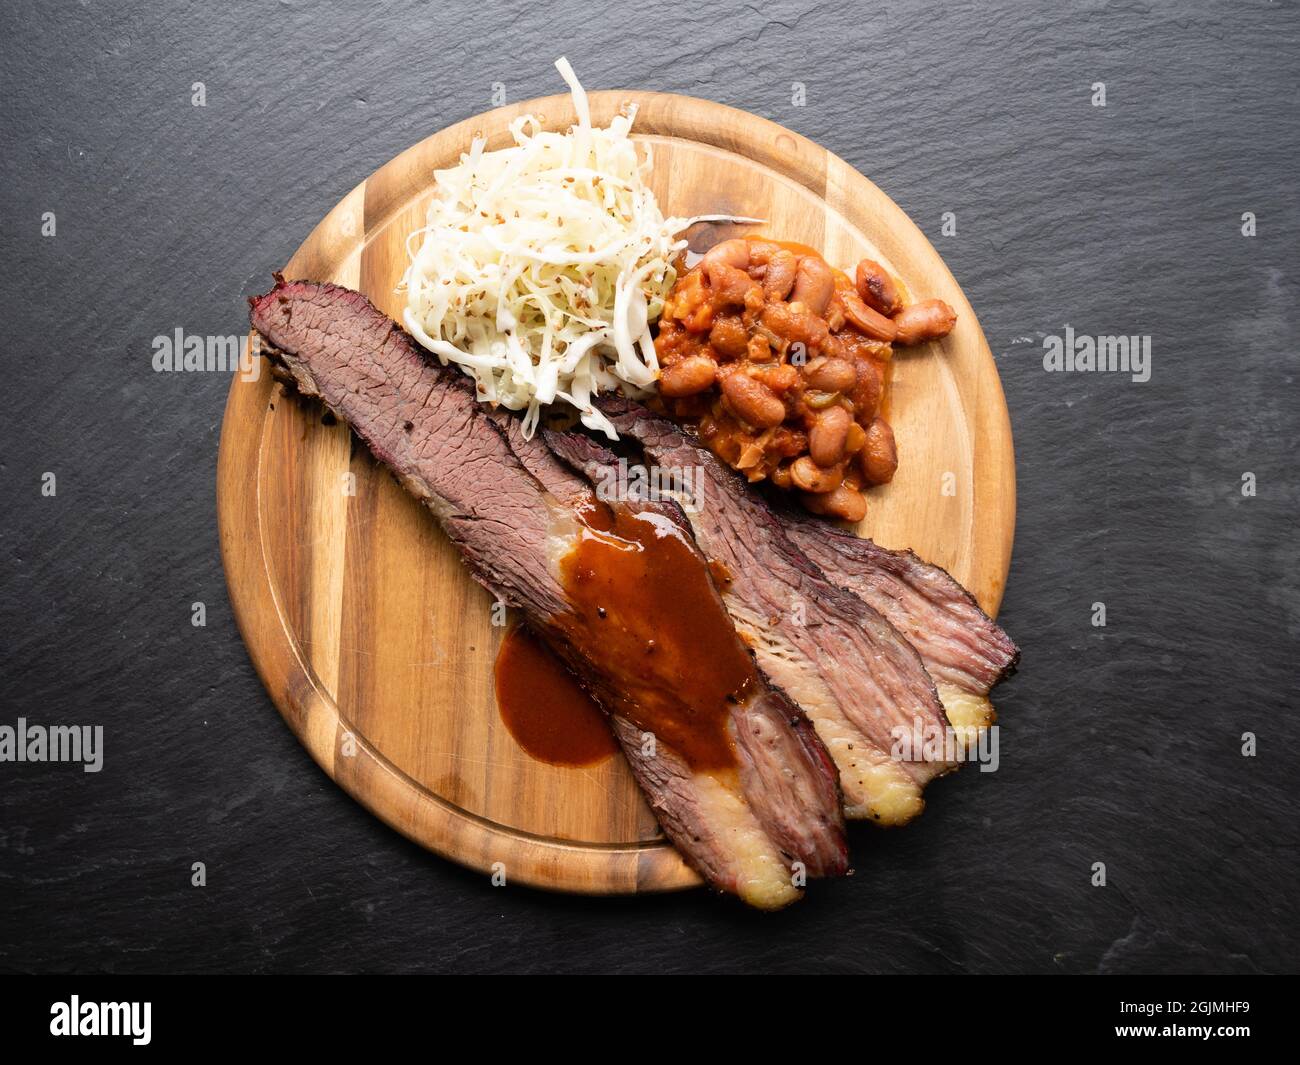 BBQ Brisket in Texas Style with Pinto Beans, Coleslaw and Red Sauce Top View Stock Photo